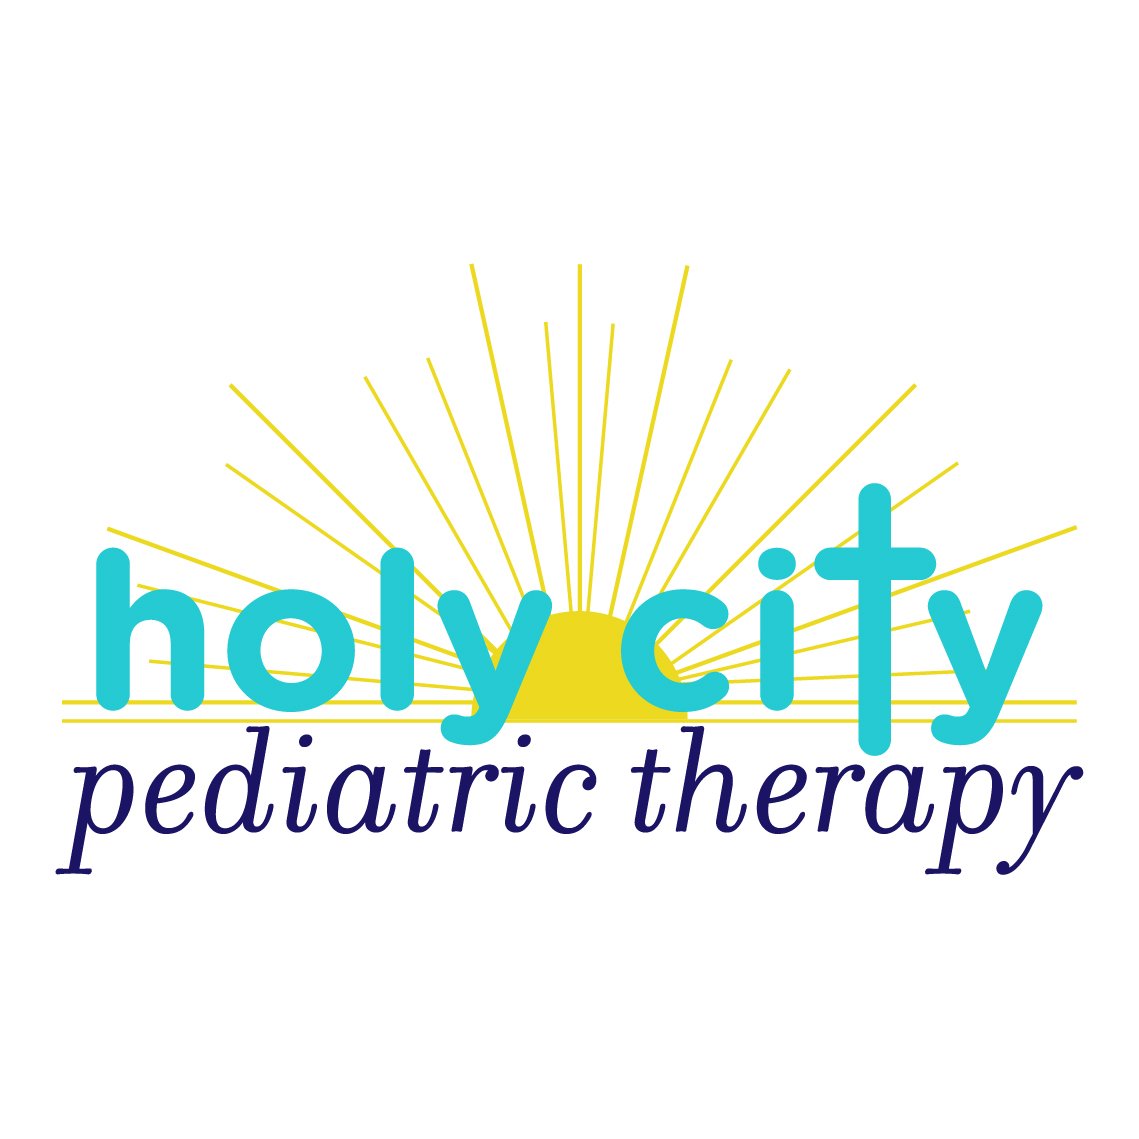 Holy City Ped Therapy logo.jpg